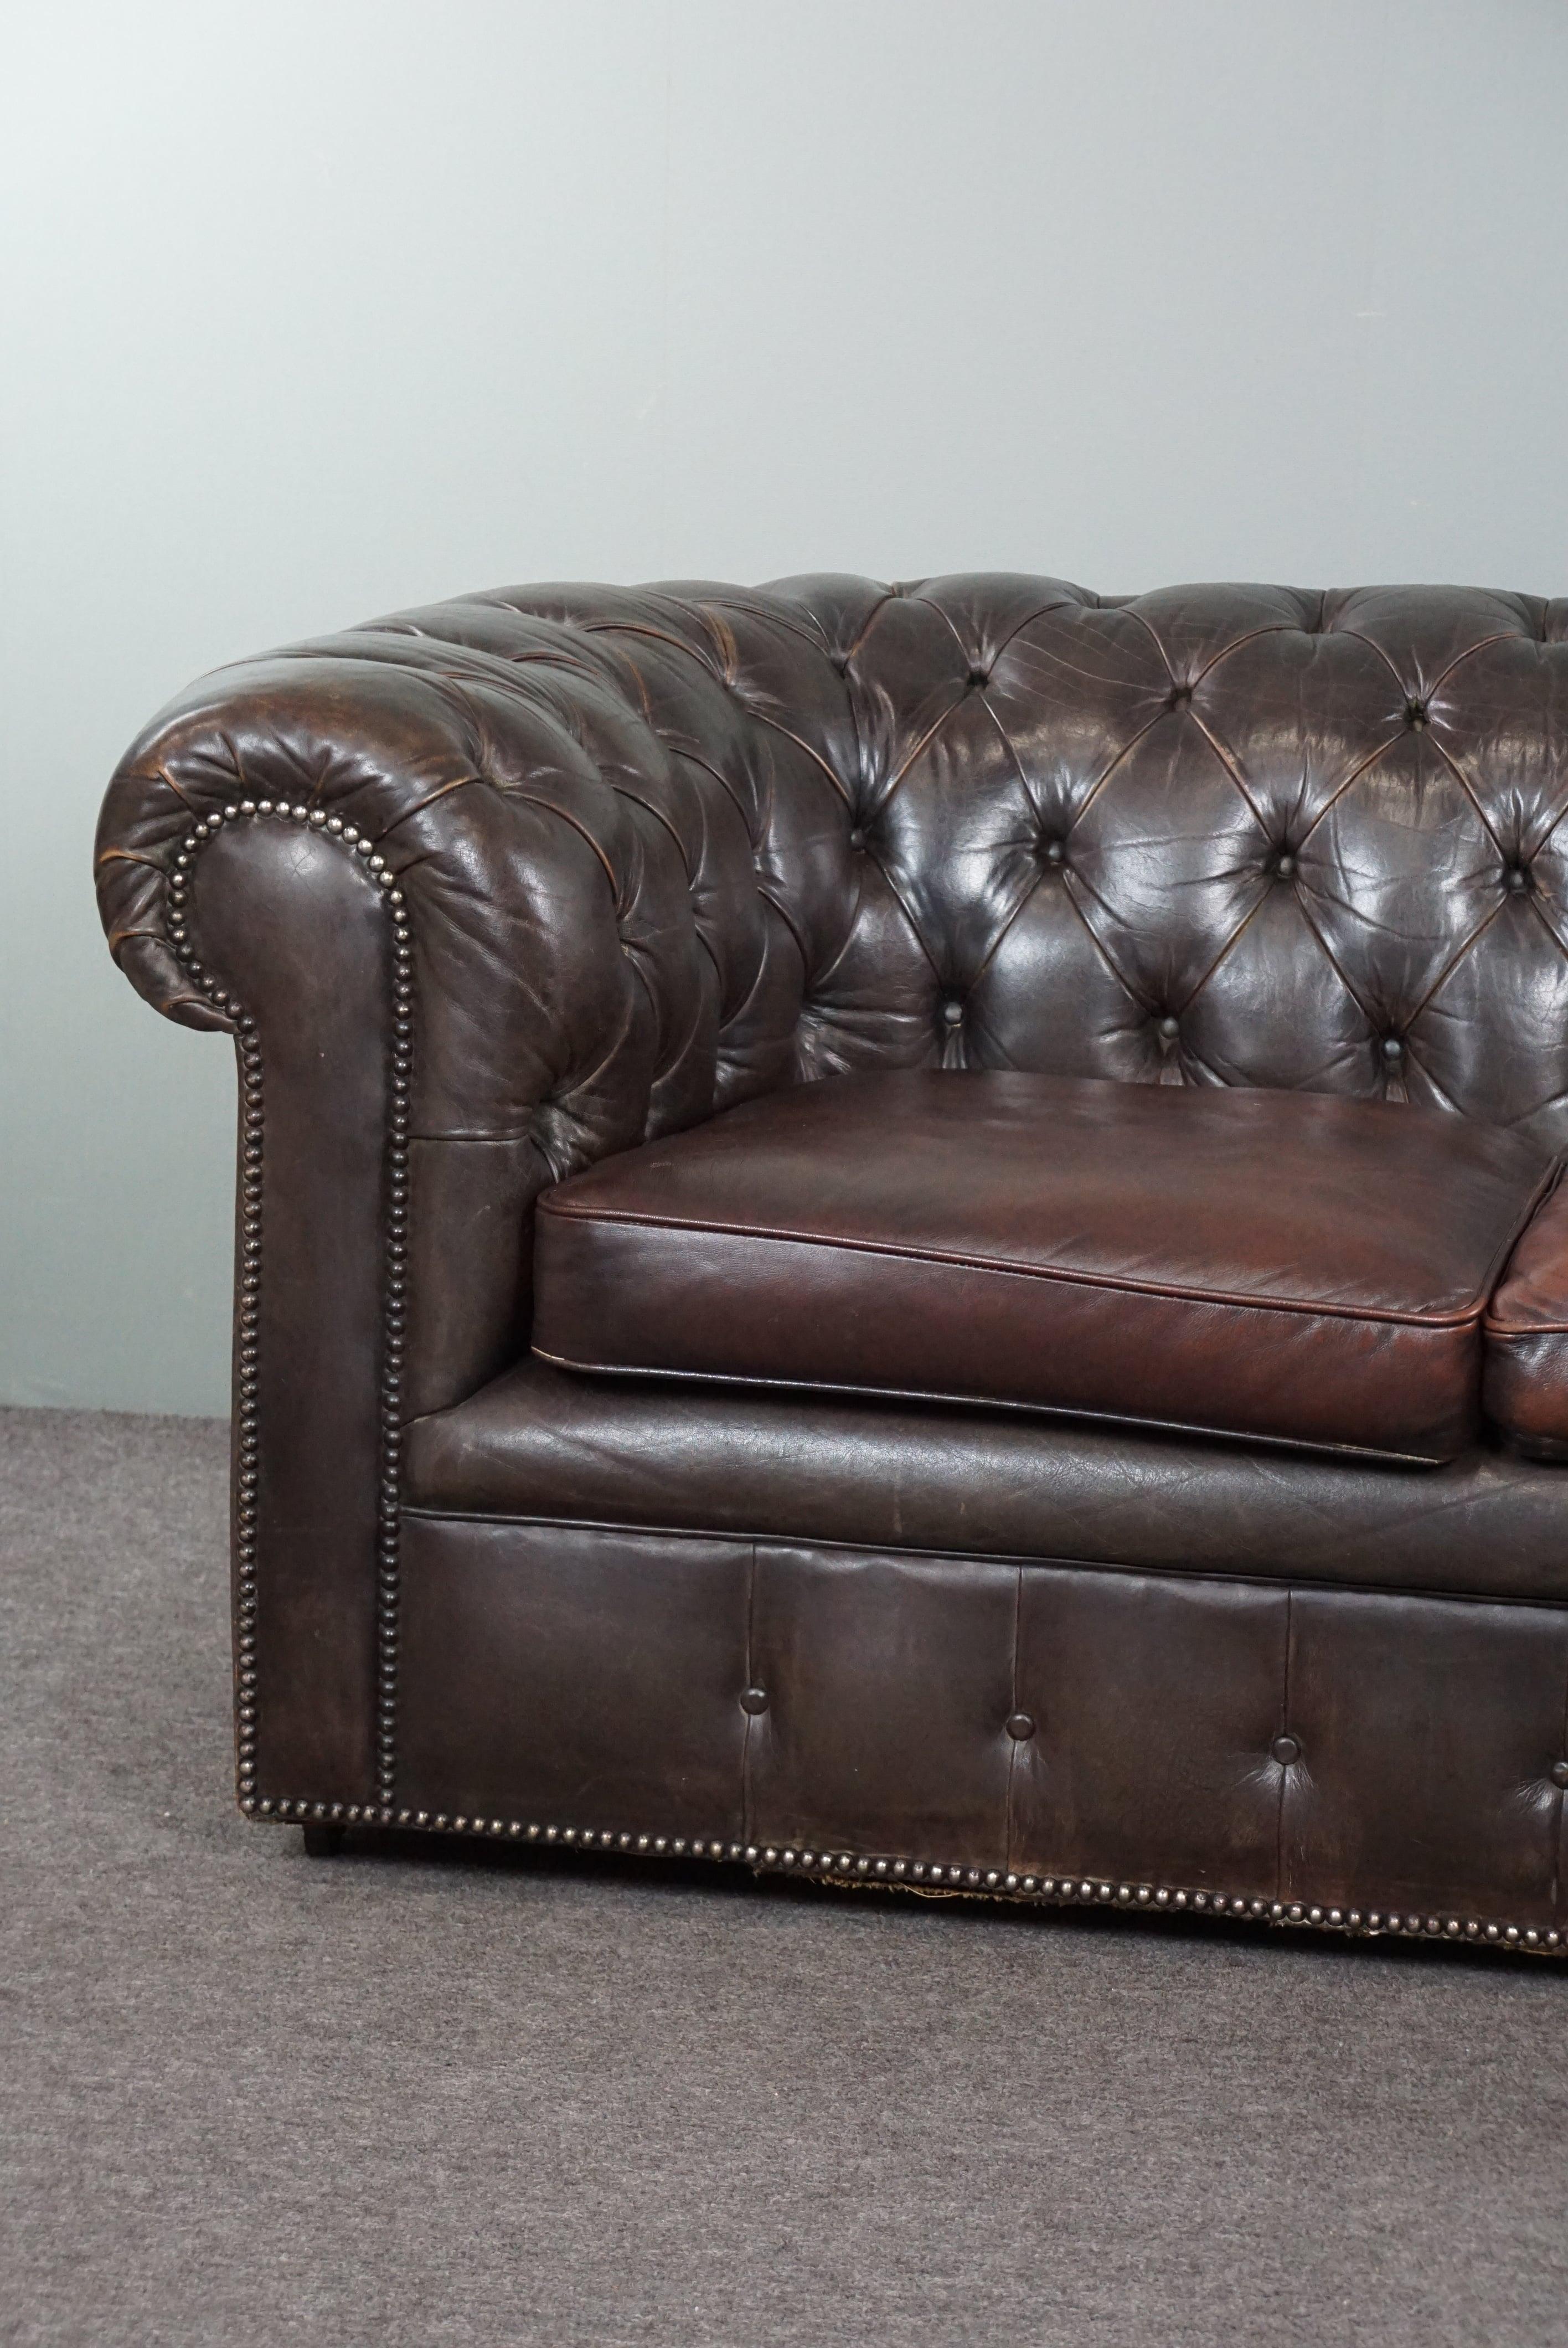 English Dazzling old Chesterfield sofa full of allure, 3 seater For Sale